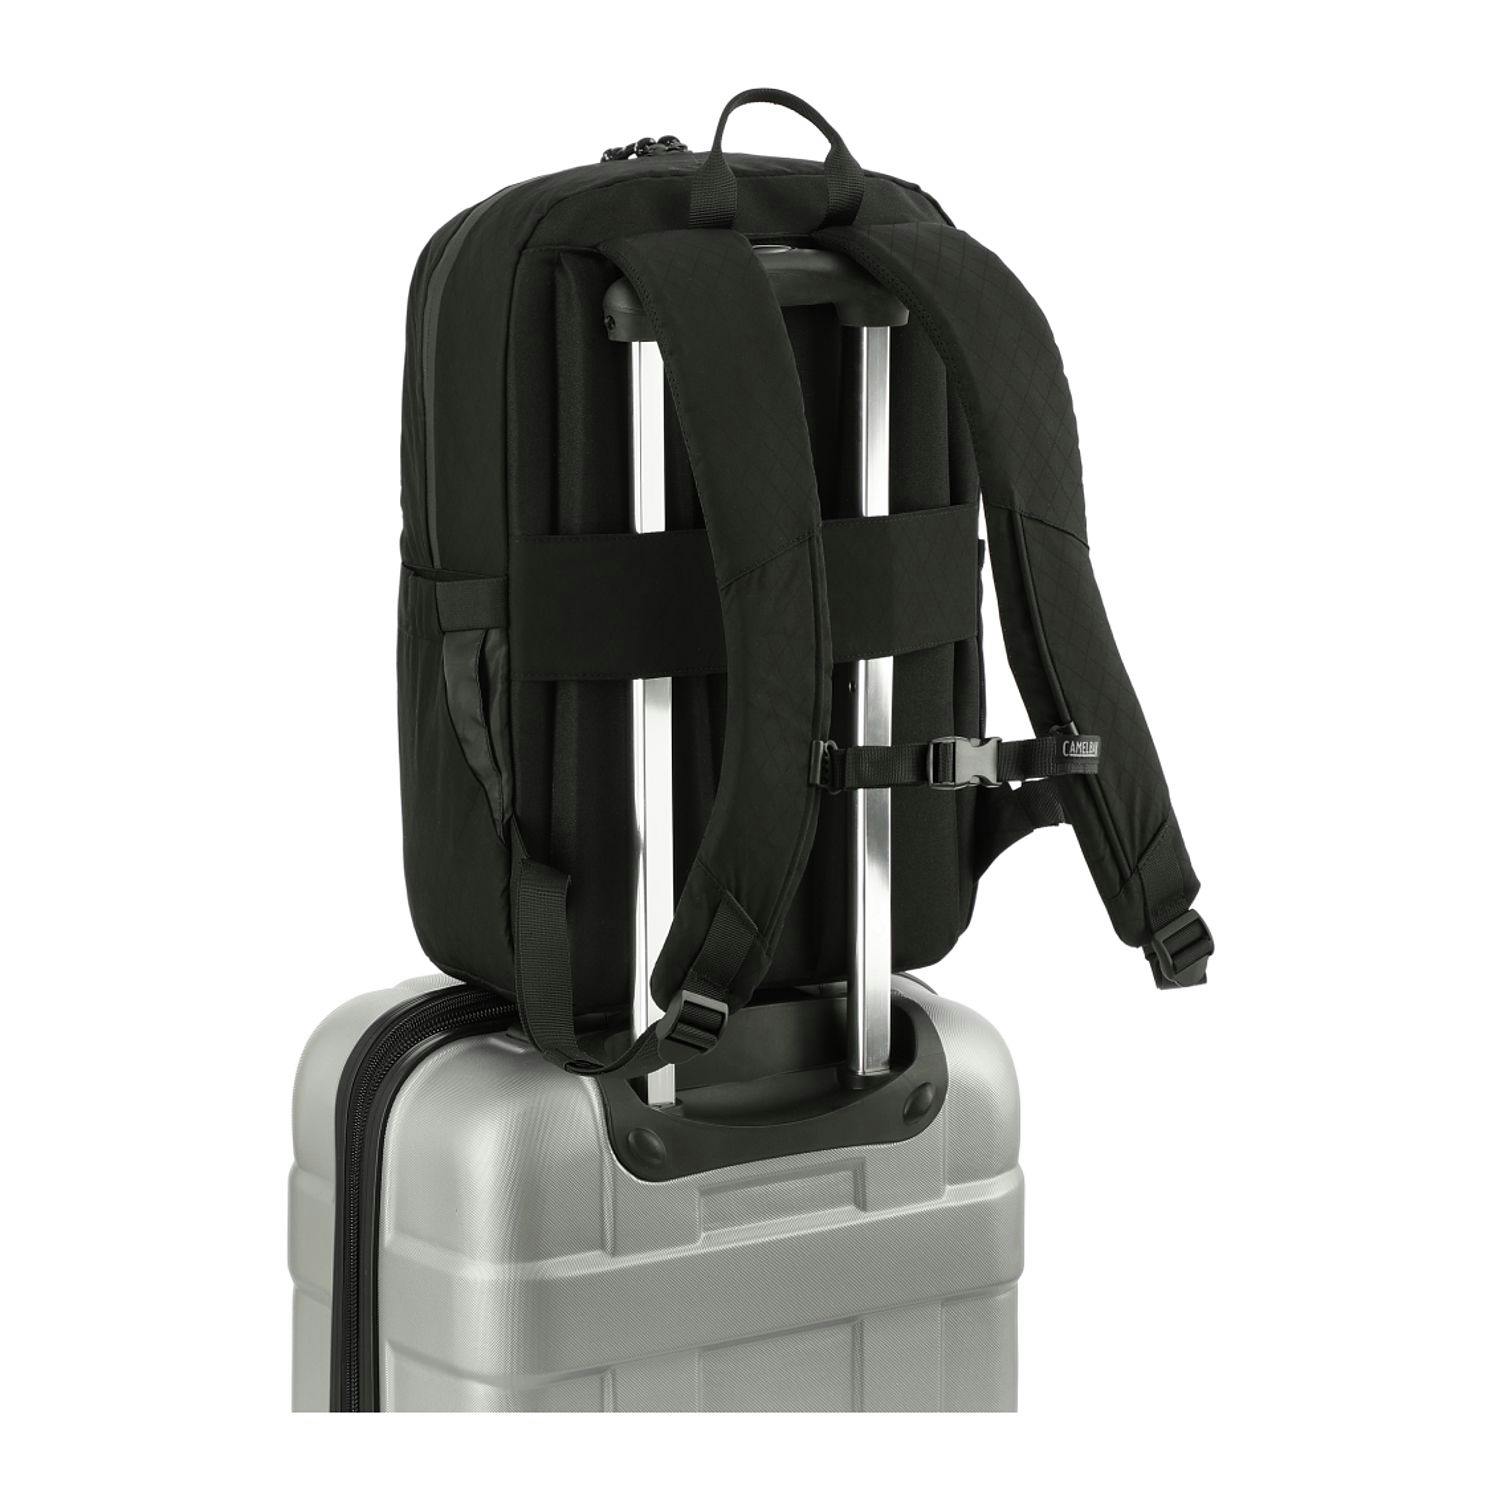 CamelBak LAX 15" Computer Backpack - additional Image 2